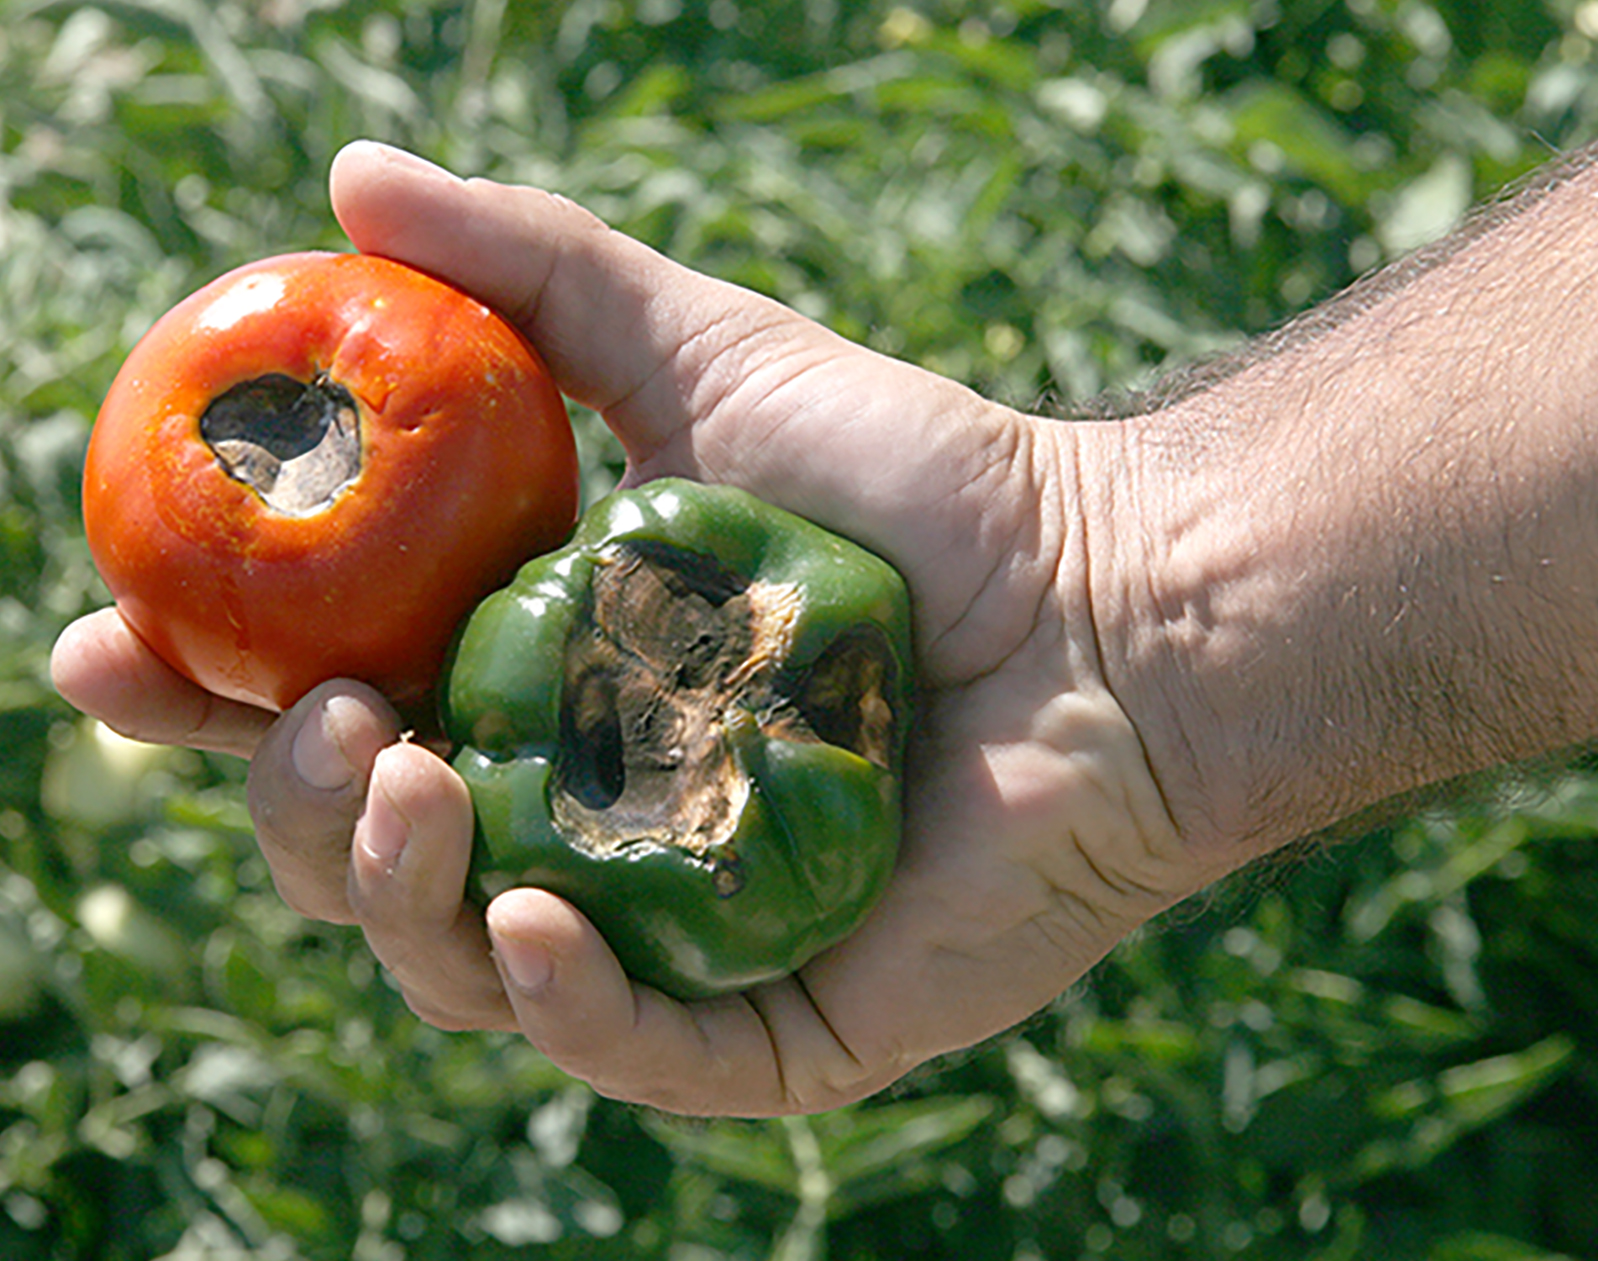 Tomatoes are prone to diseases like blossom end rot, a condition where the bottom of the fruit turns black due to lack of calcium.